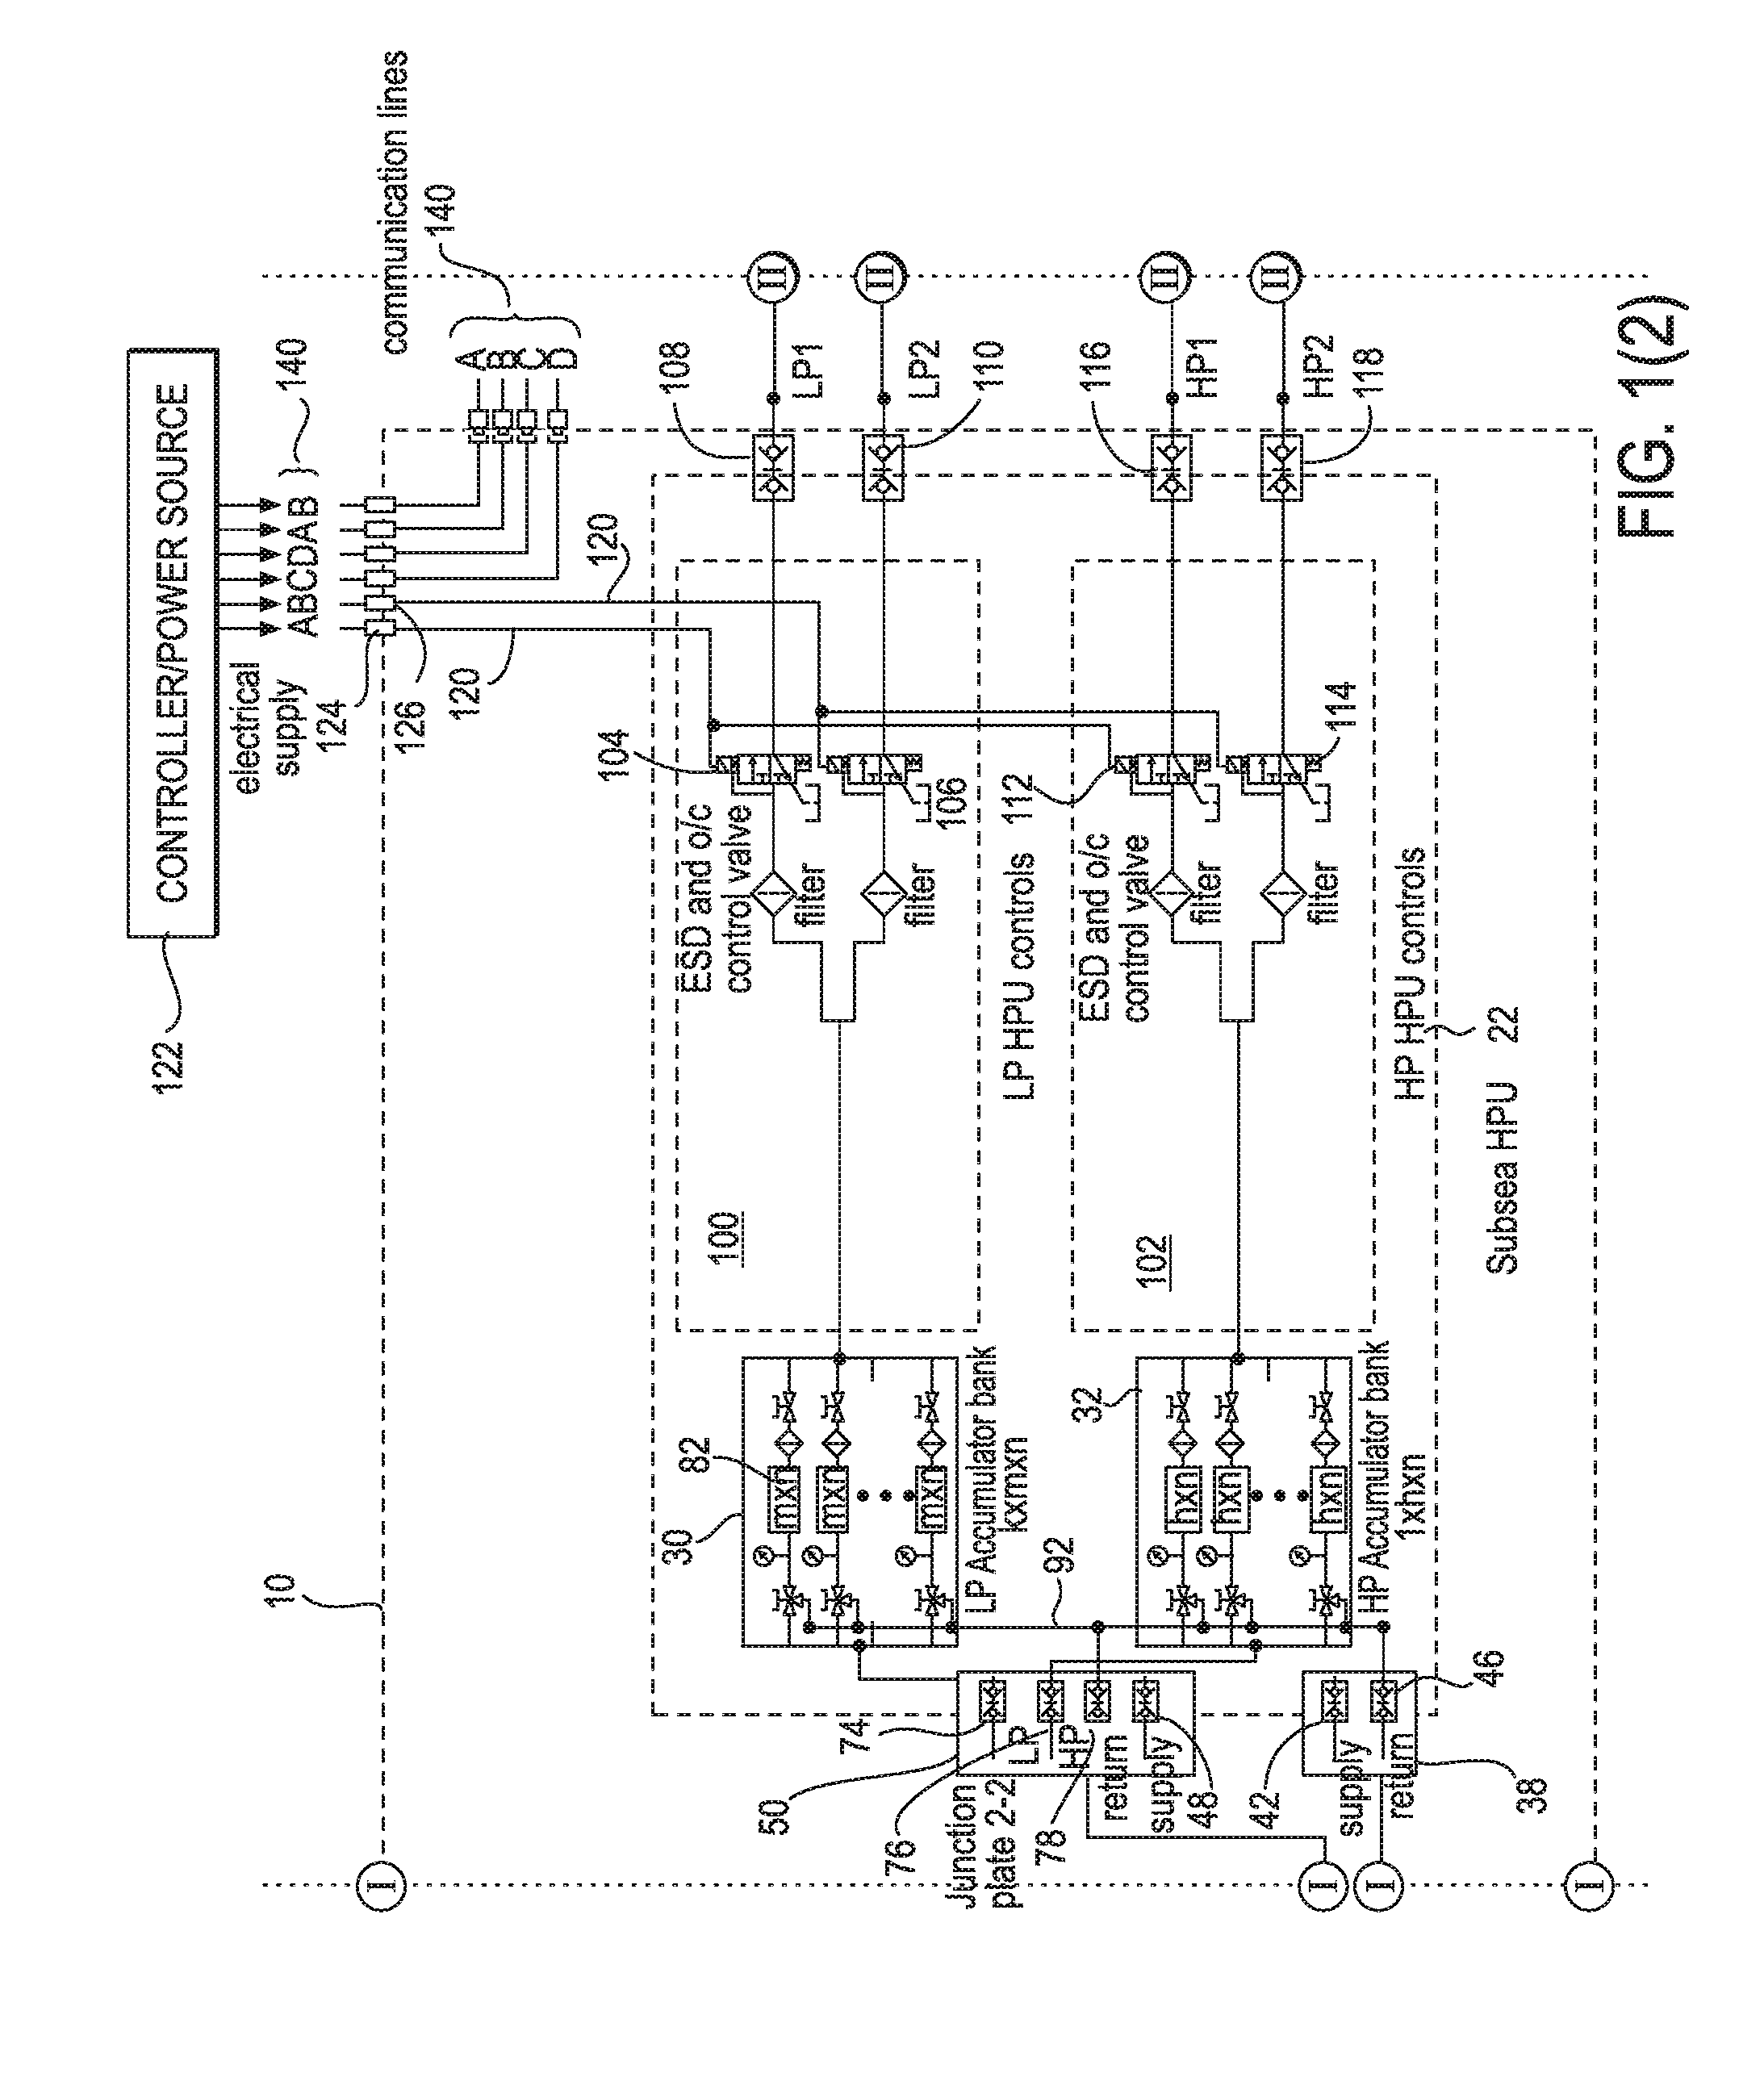 Apparatus and method for providing a controllable supply of fluid to subsea well equipment